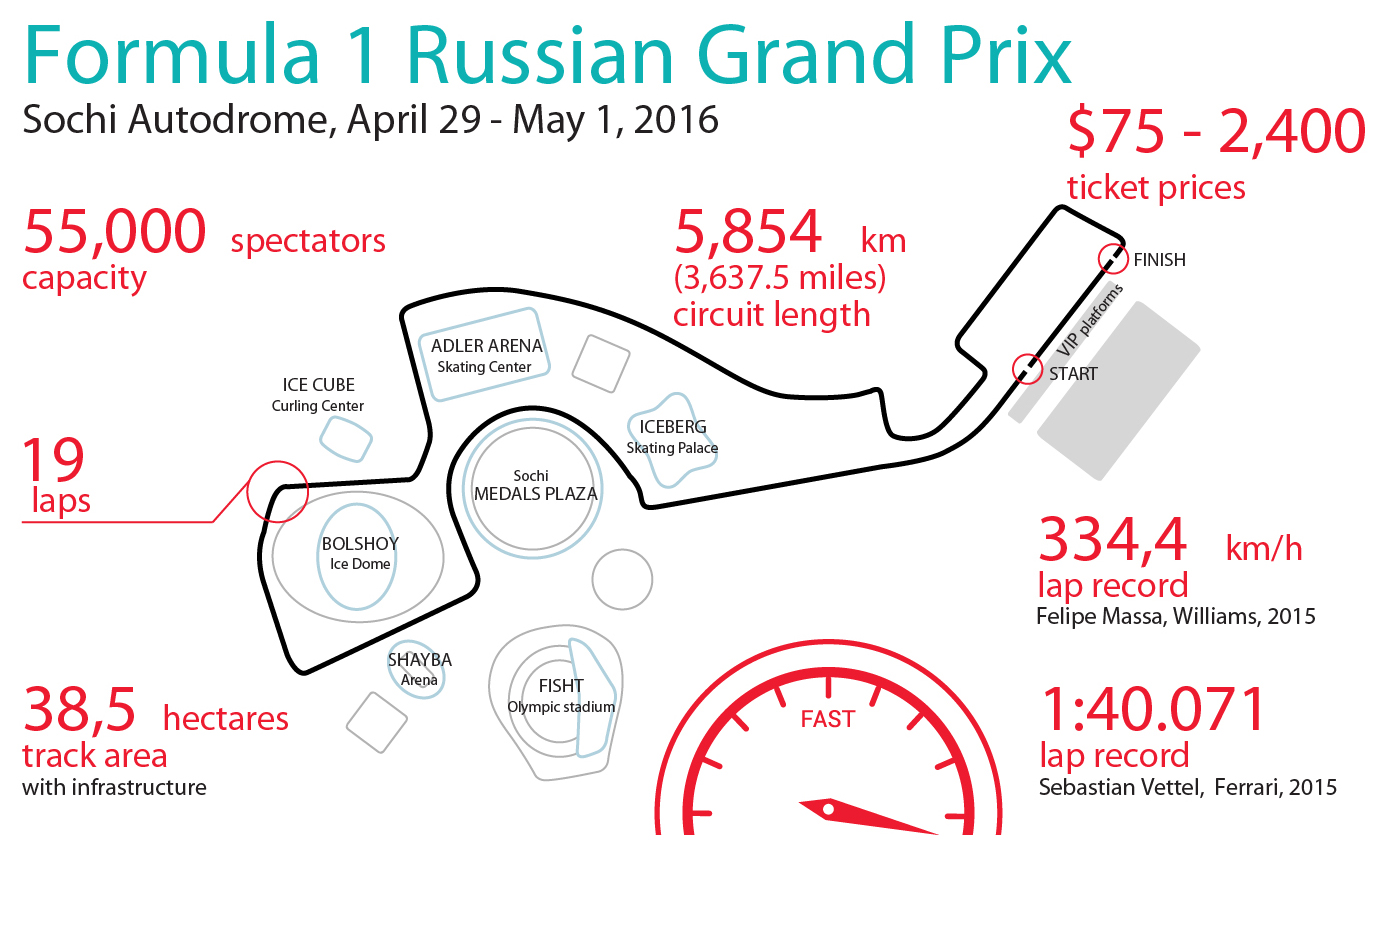 Read more: 4 things you didn’t know about Russia’s Formula 1 Grand Prix>>>